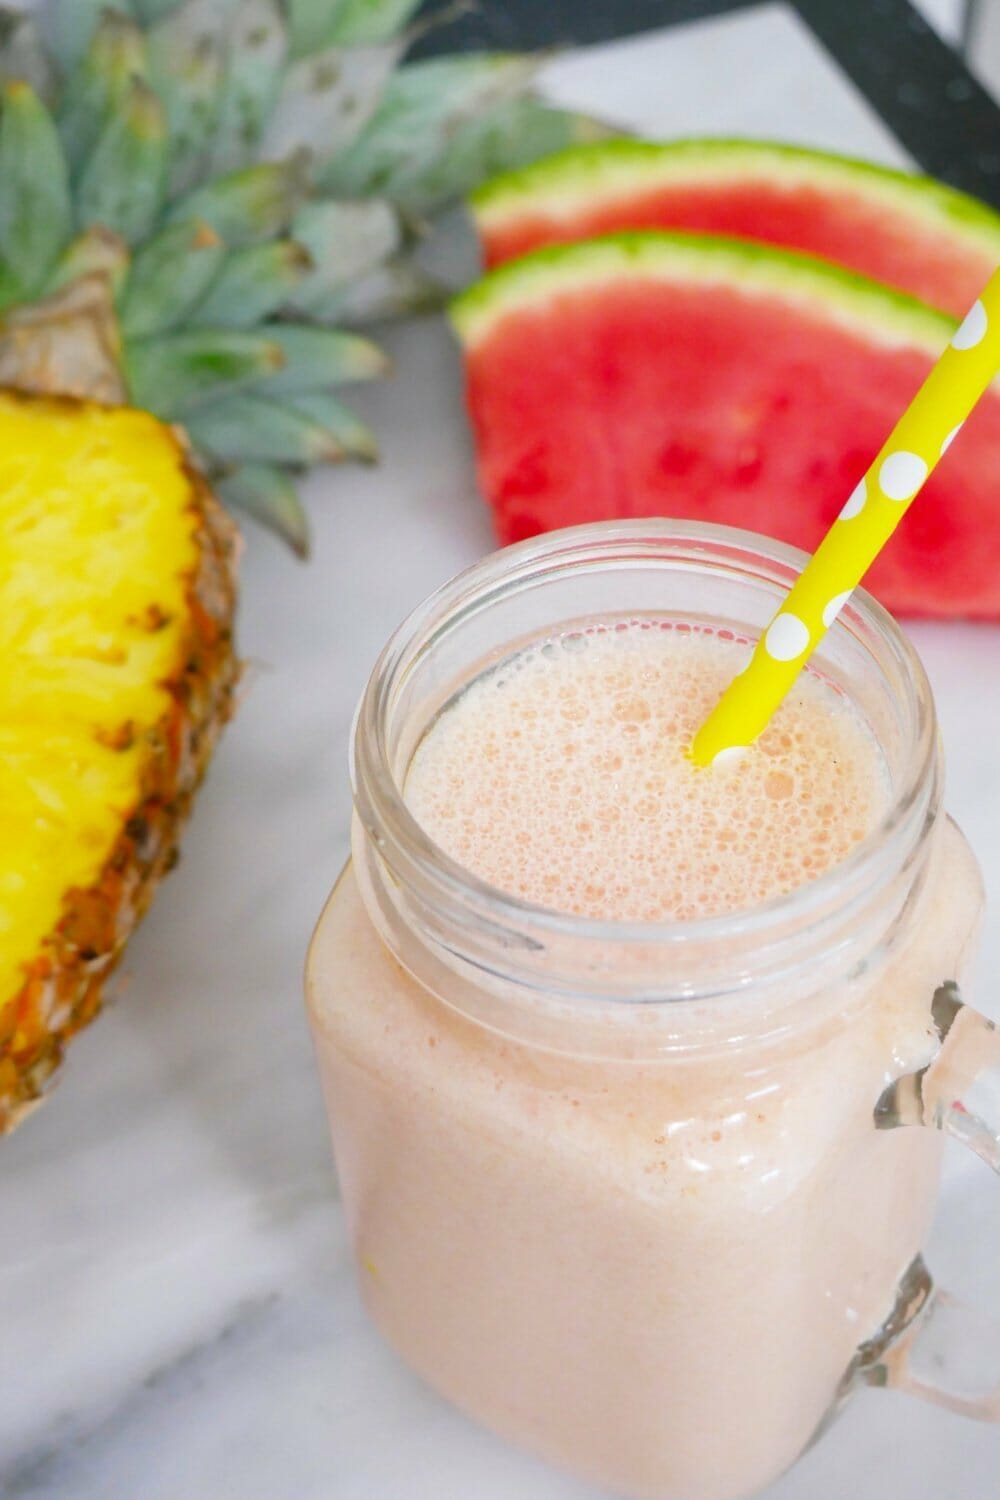 Super healthy watermelon pineapple smoothie for weight loss (+ tips!)